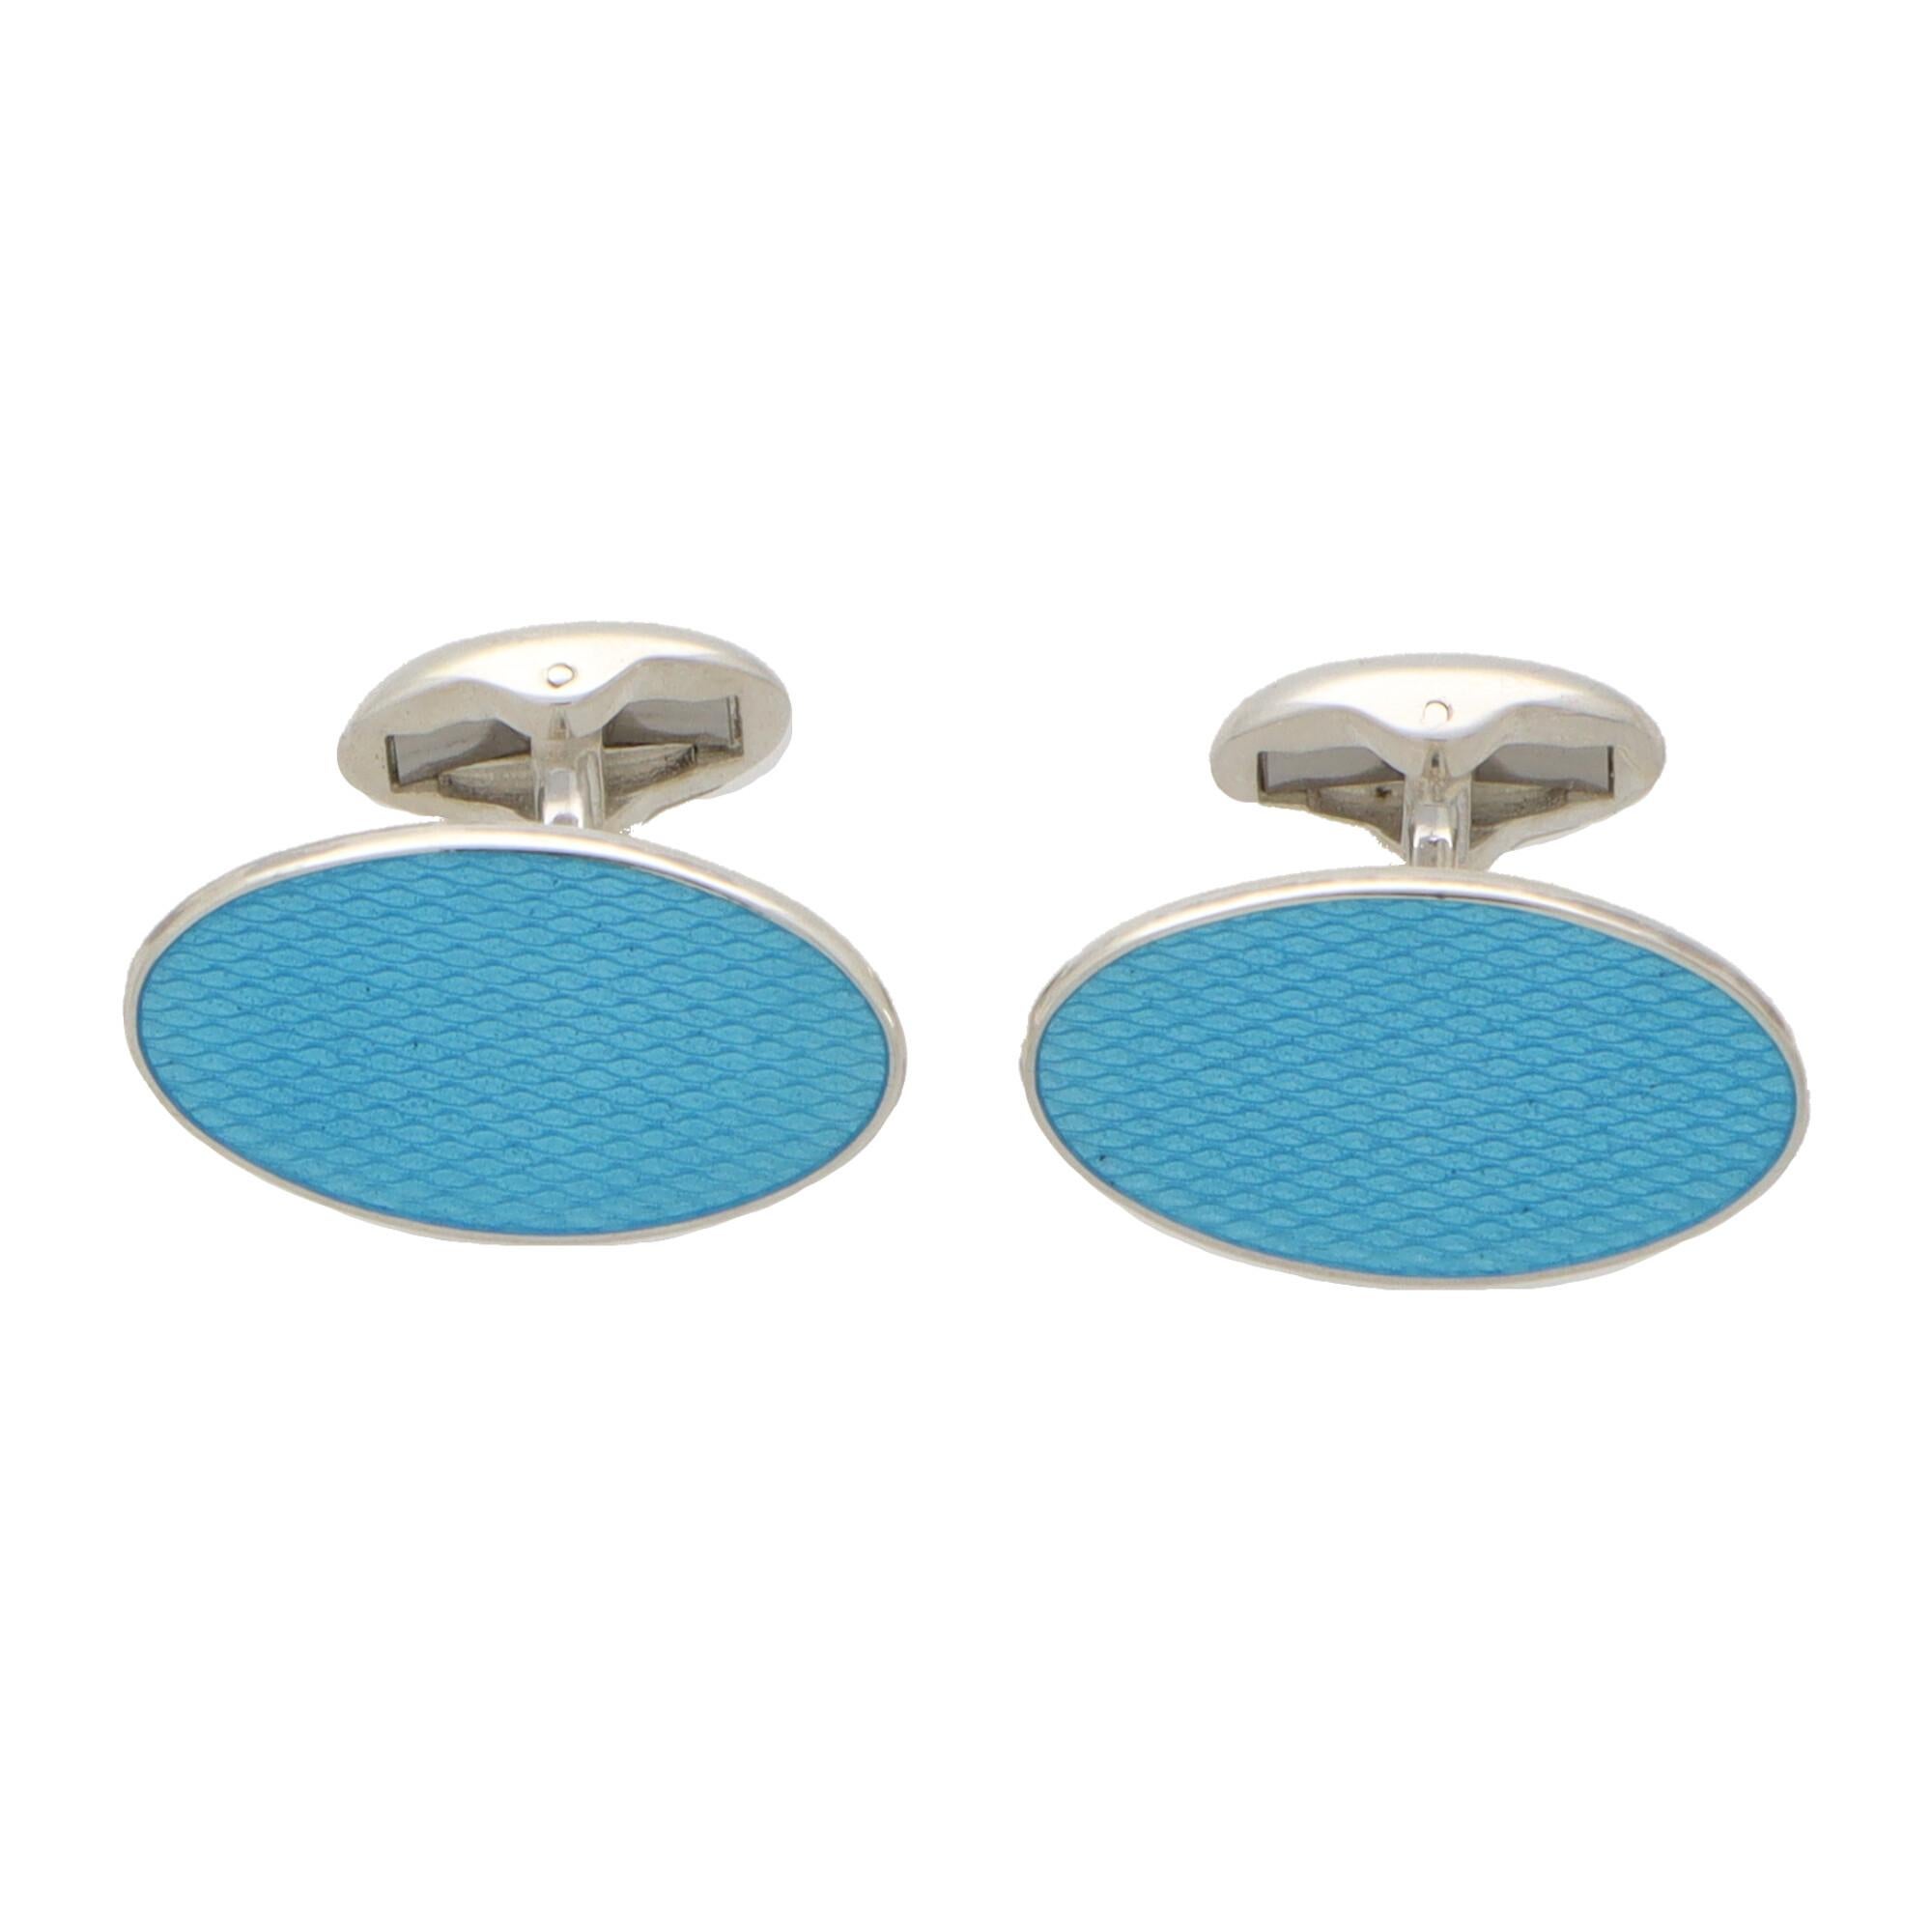 An extremely striking pair of turquoise elongated oval swivel back cufflinks made in British sterling silver.

Each cufflink is composed of two elongated oval faces set with textured turquoise blue enamel. They are secured to reverse with a swivel